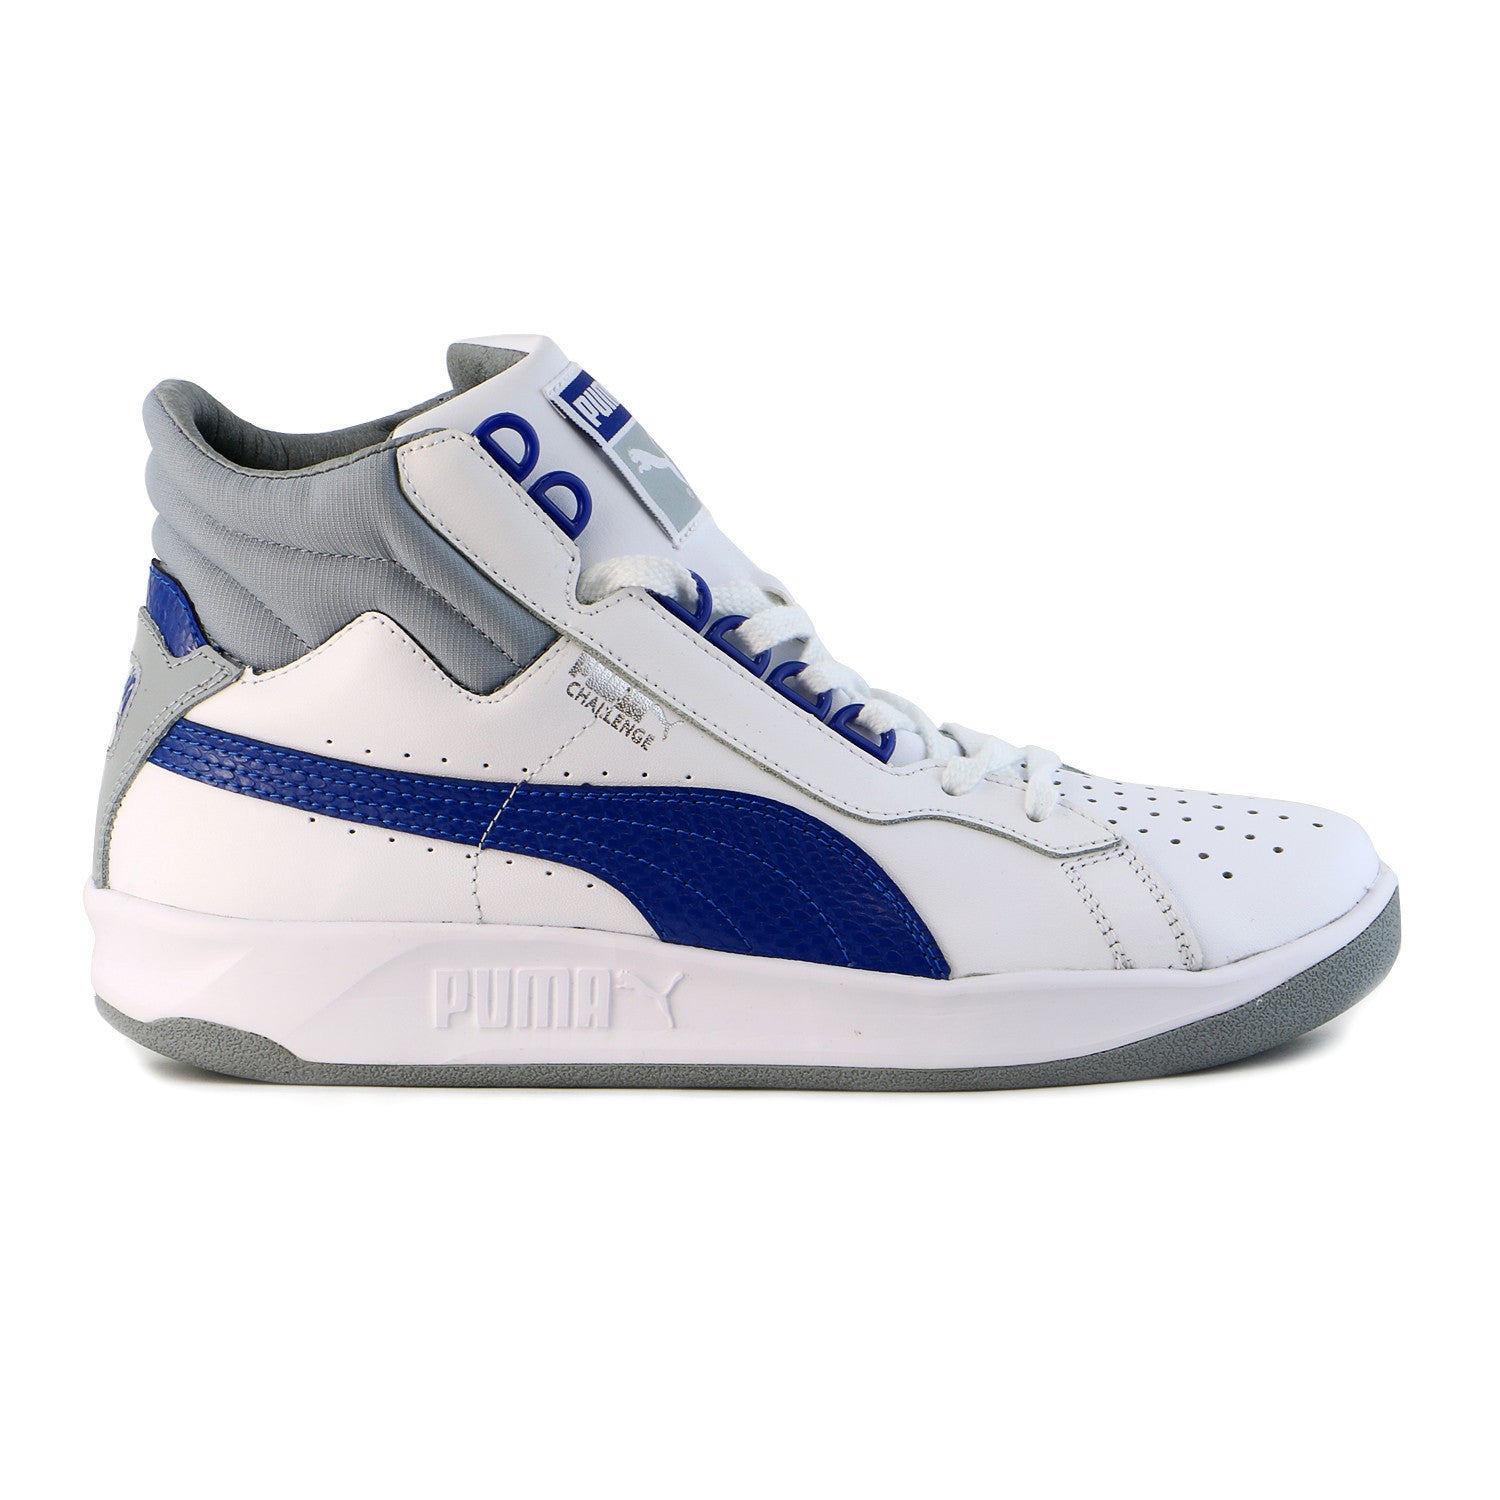 PUMA Sneakers, Shoes, Clothing & Apparel